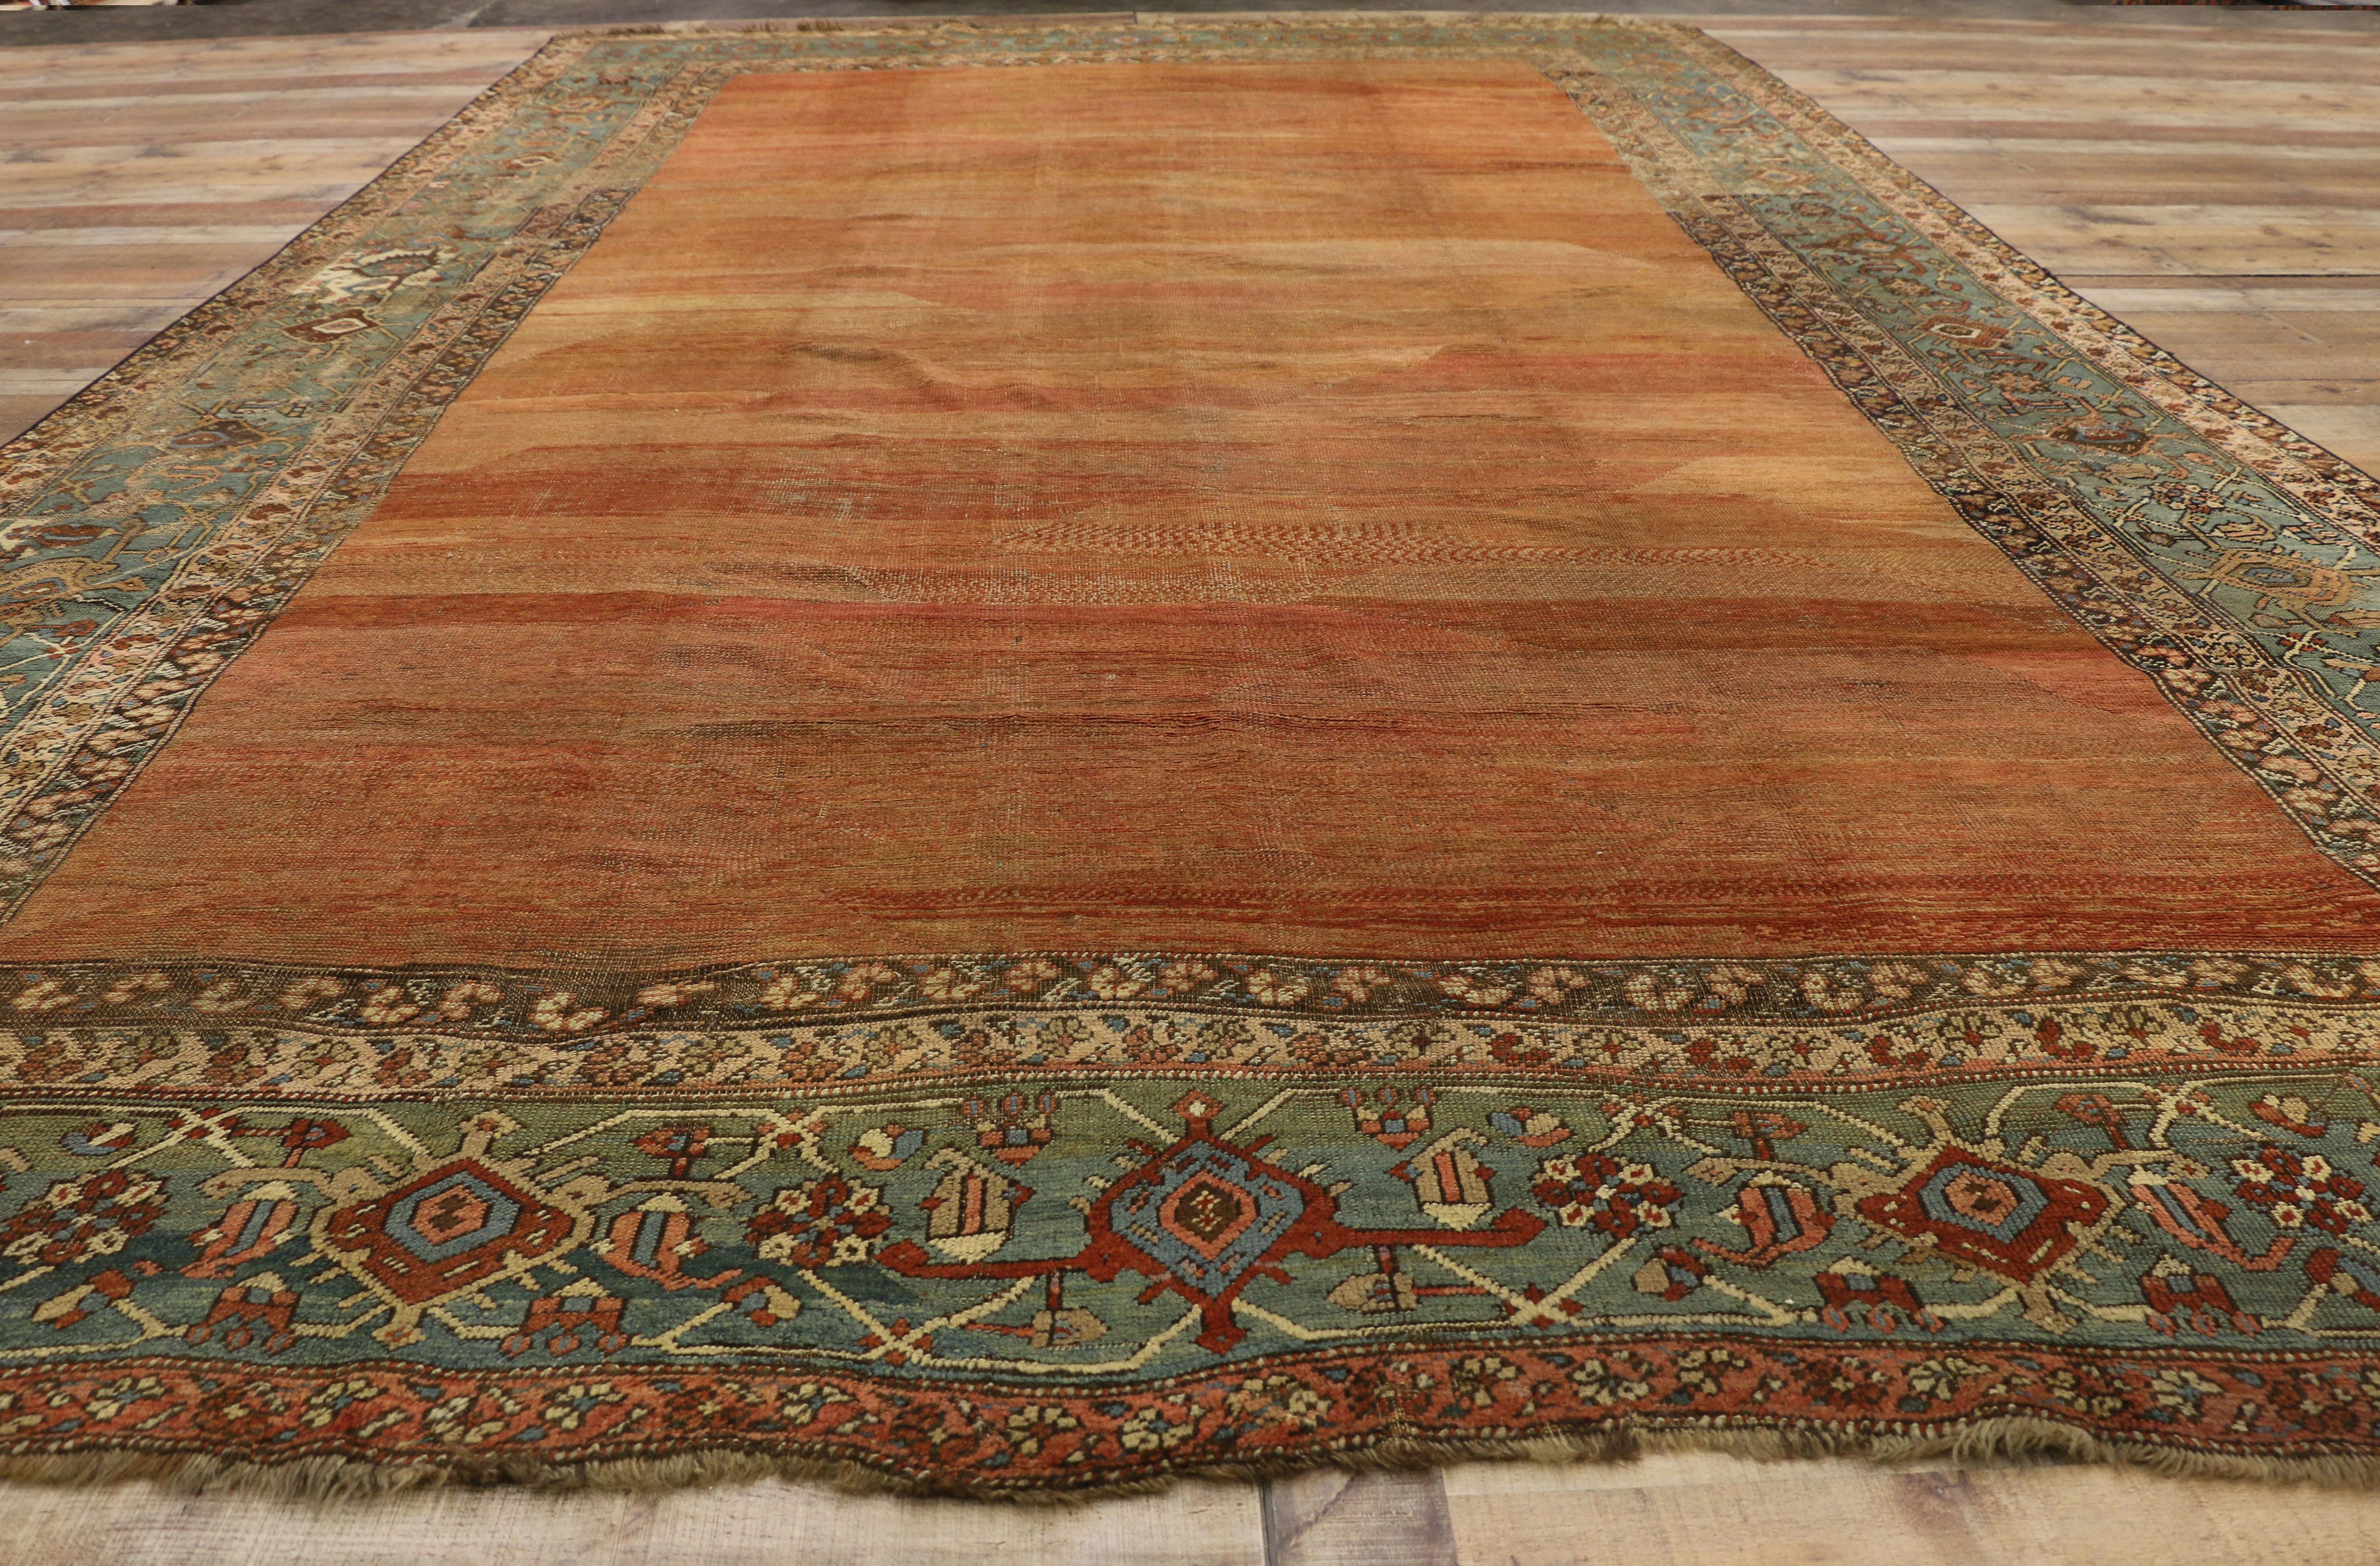 Mid-19th Century Antique Persian Bakshaish Rug with Rustic Mediterranean Style For Sale 2